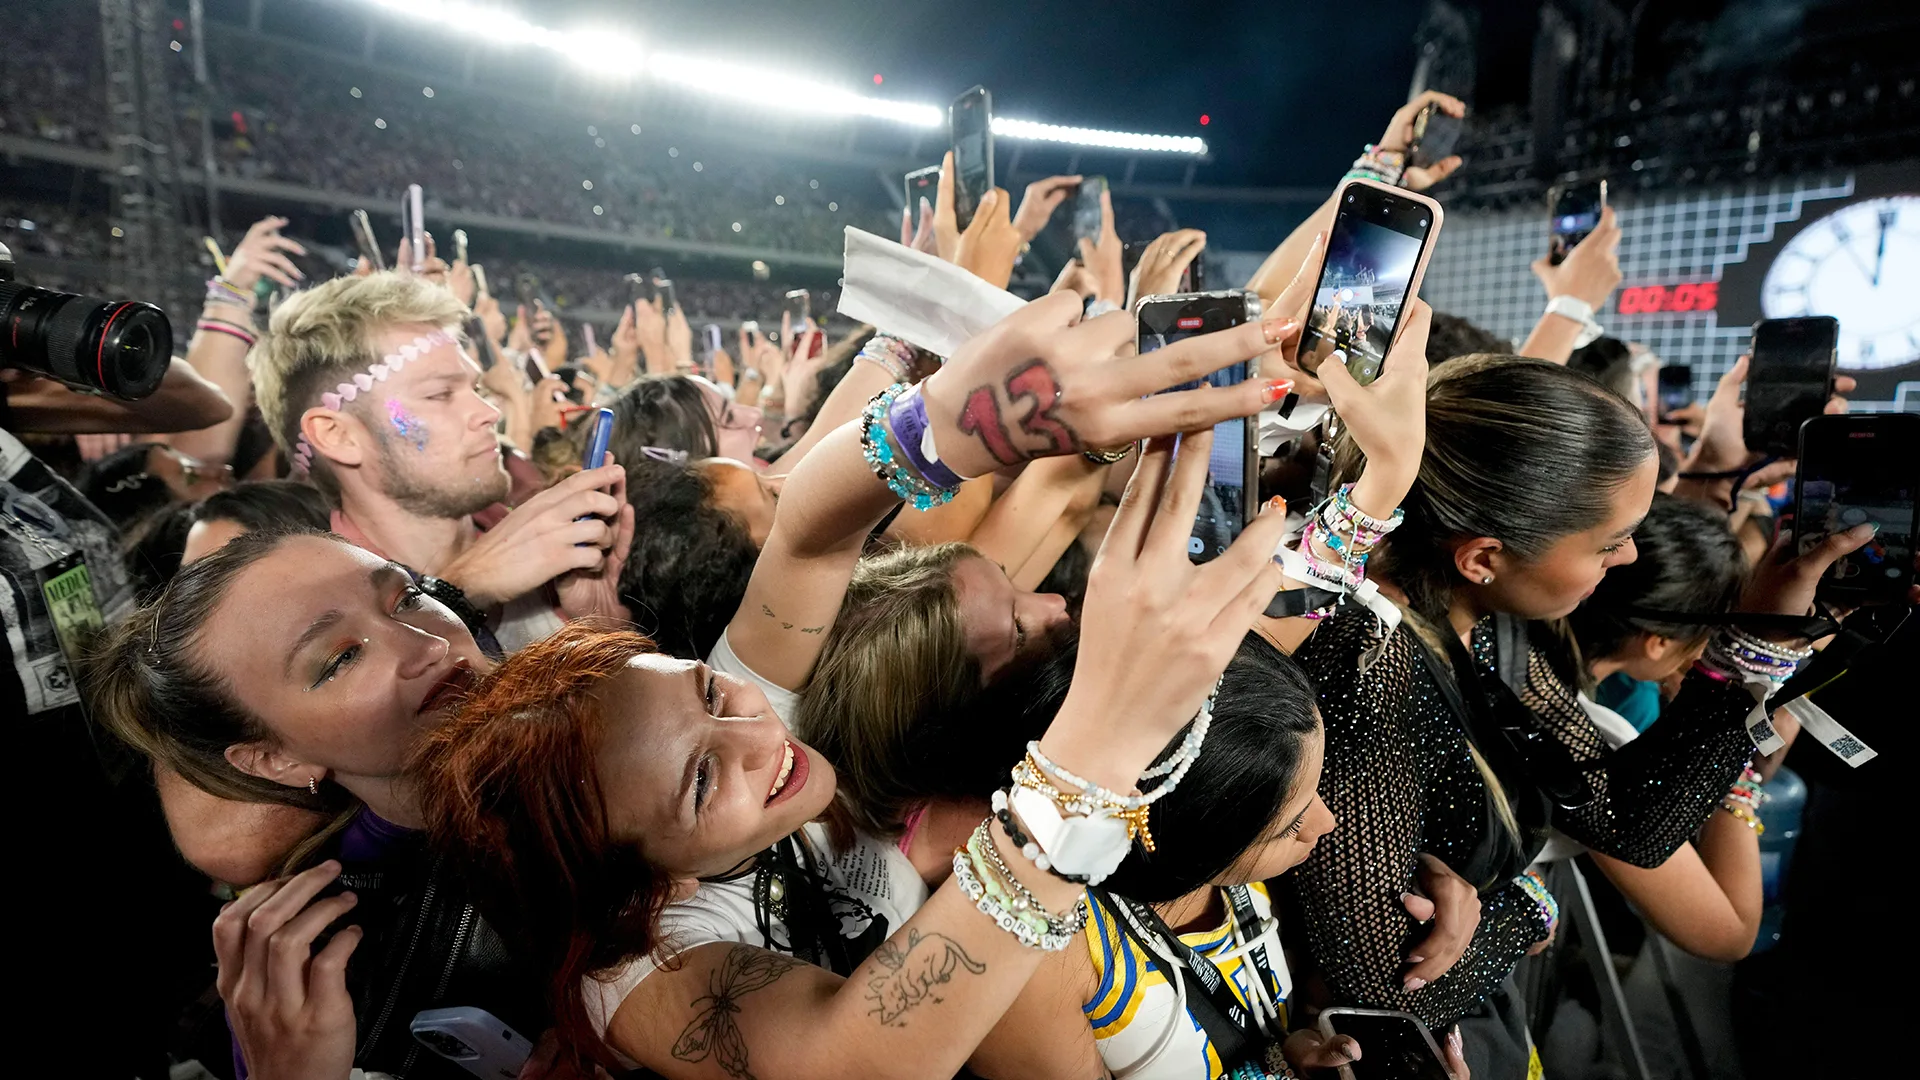 Group of fans at the Eras Tour concert in Argentina trying to take photos of the stage. Fan in foreground has the number 13 on hand